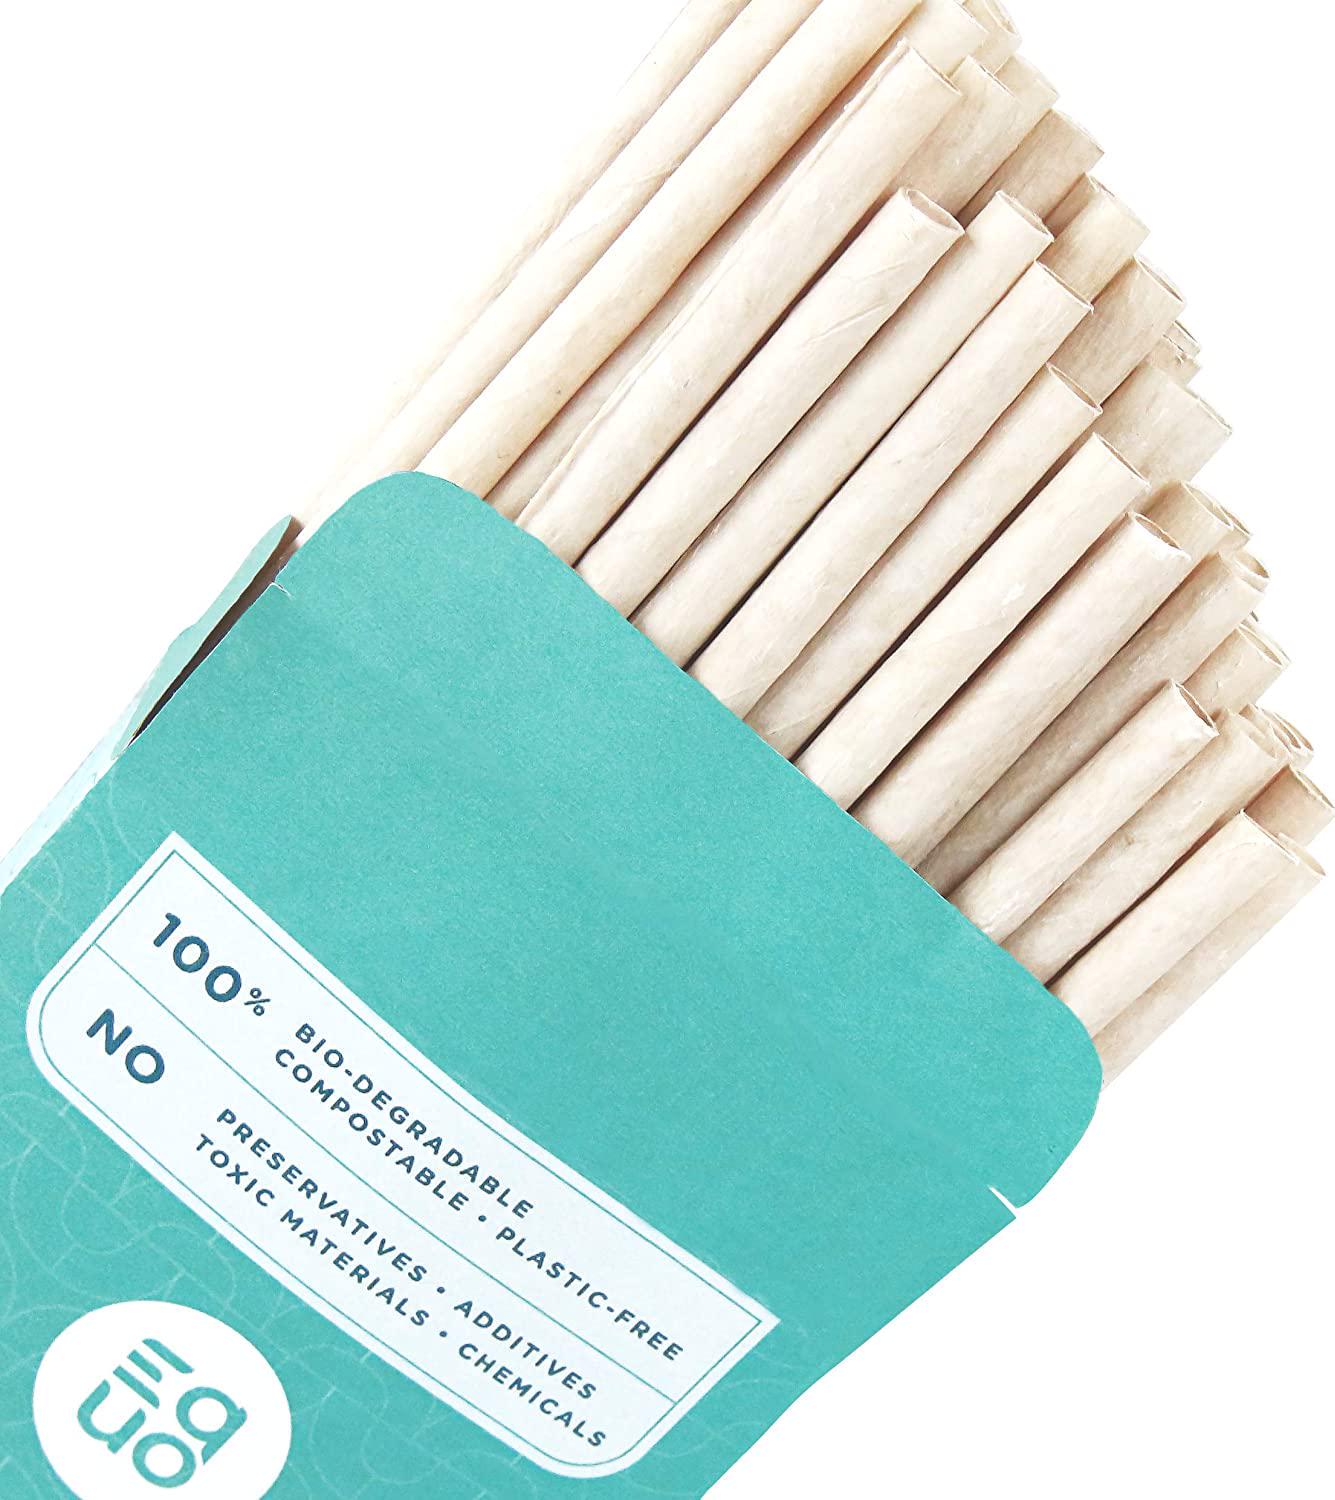 Equo, EQUO Coconut Straws, Disposable, Biodegradable, Compostable, and Plastic-Free Drinking Straws, Pack of 50, Standard